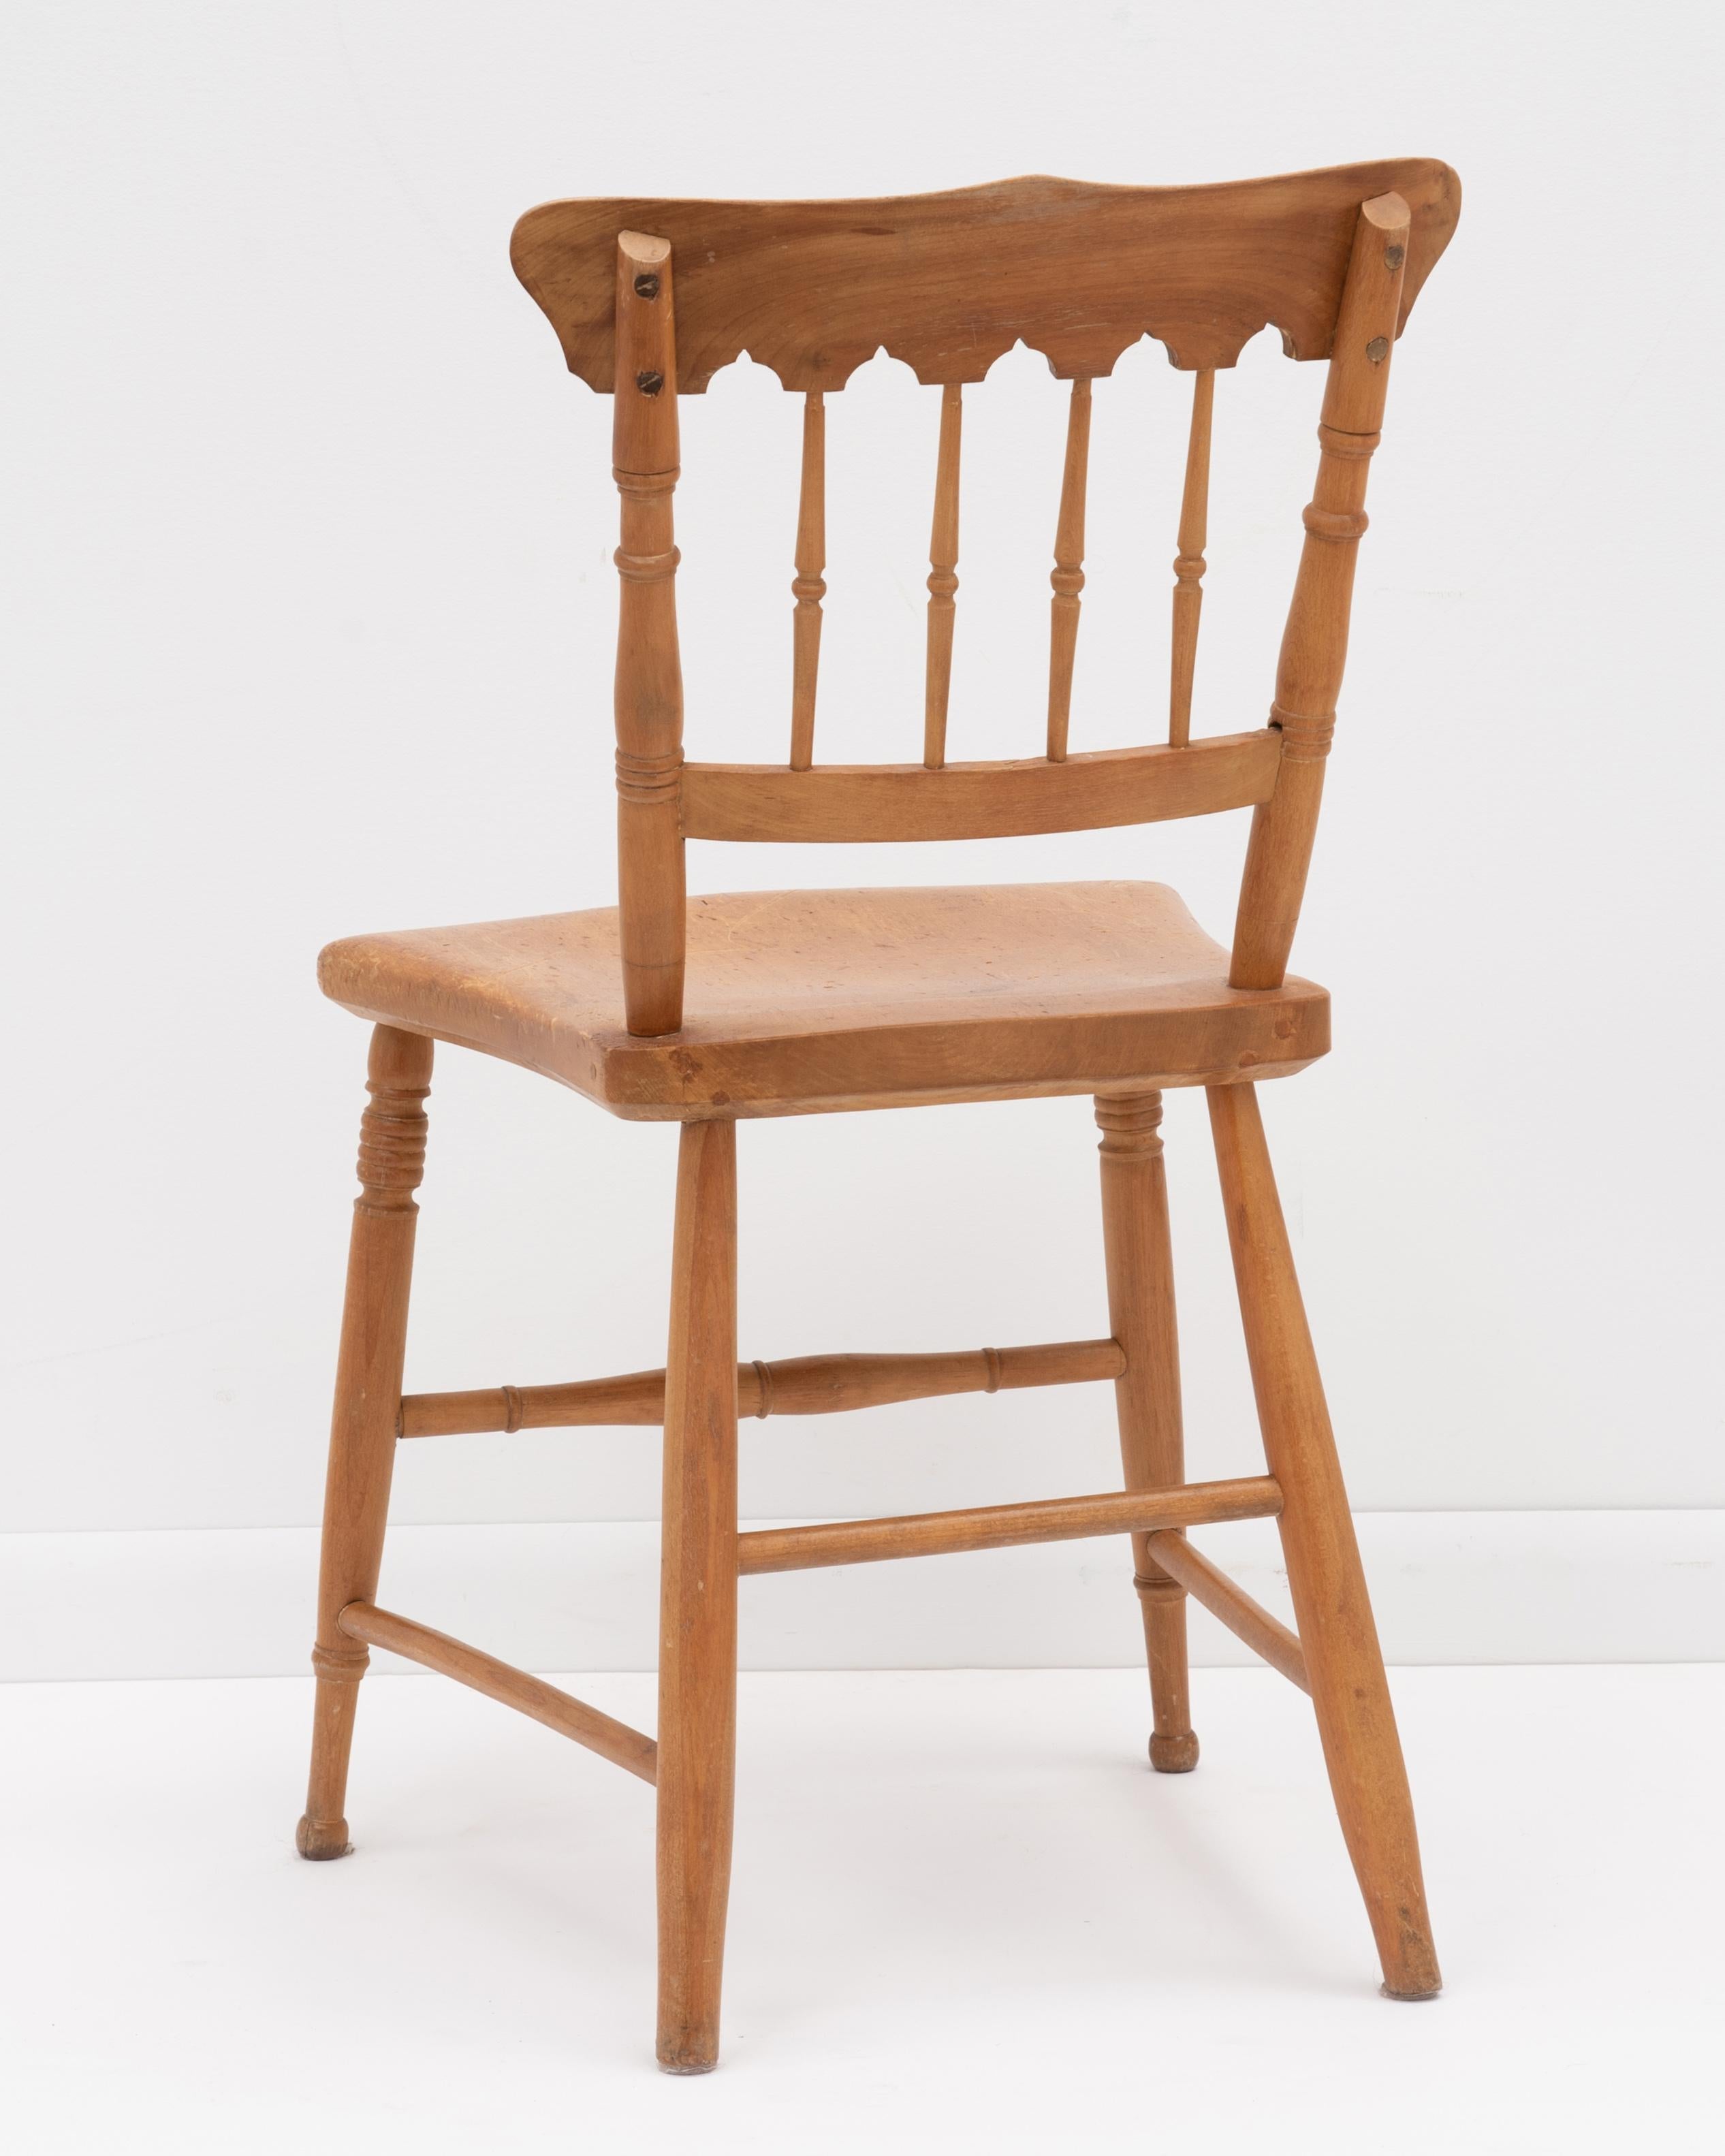 English Scrubbed Pine Plank Seat Dining Chairs Farmhouse Cottage, a Set of Four For Sale 1